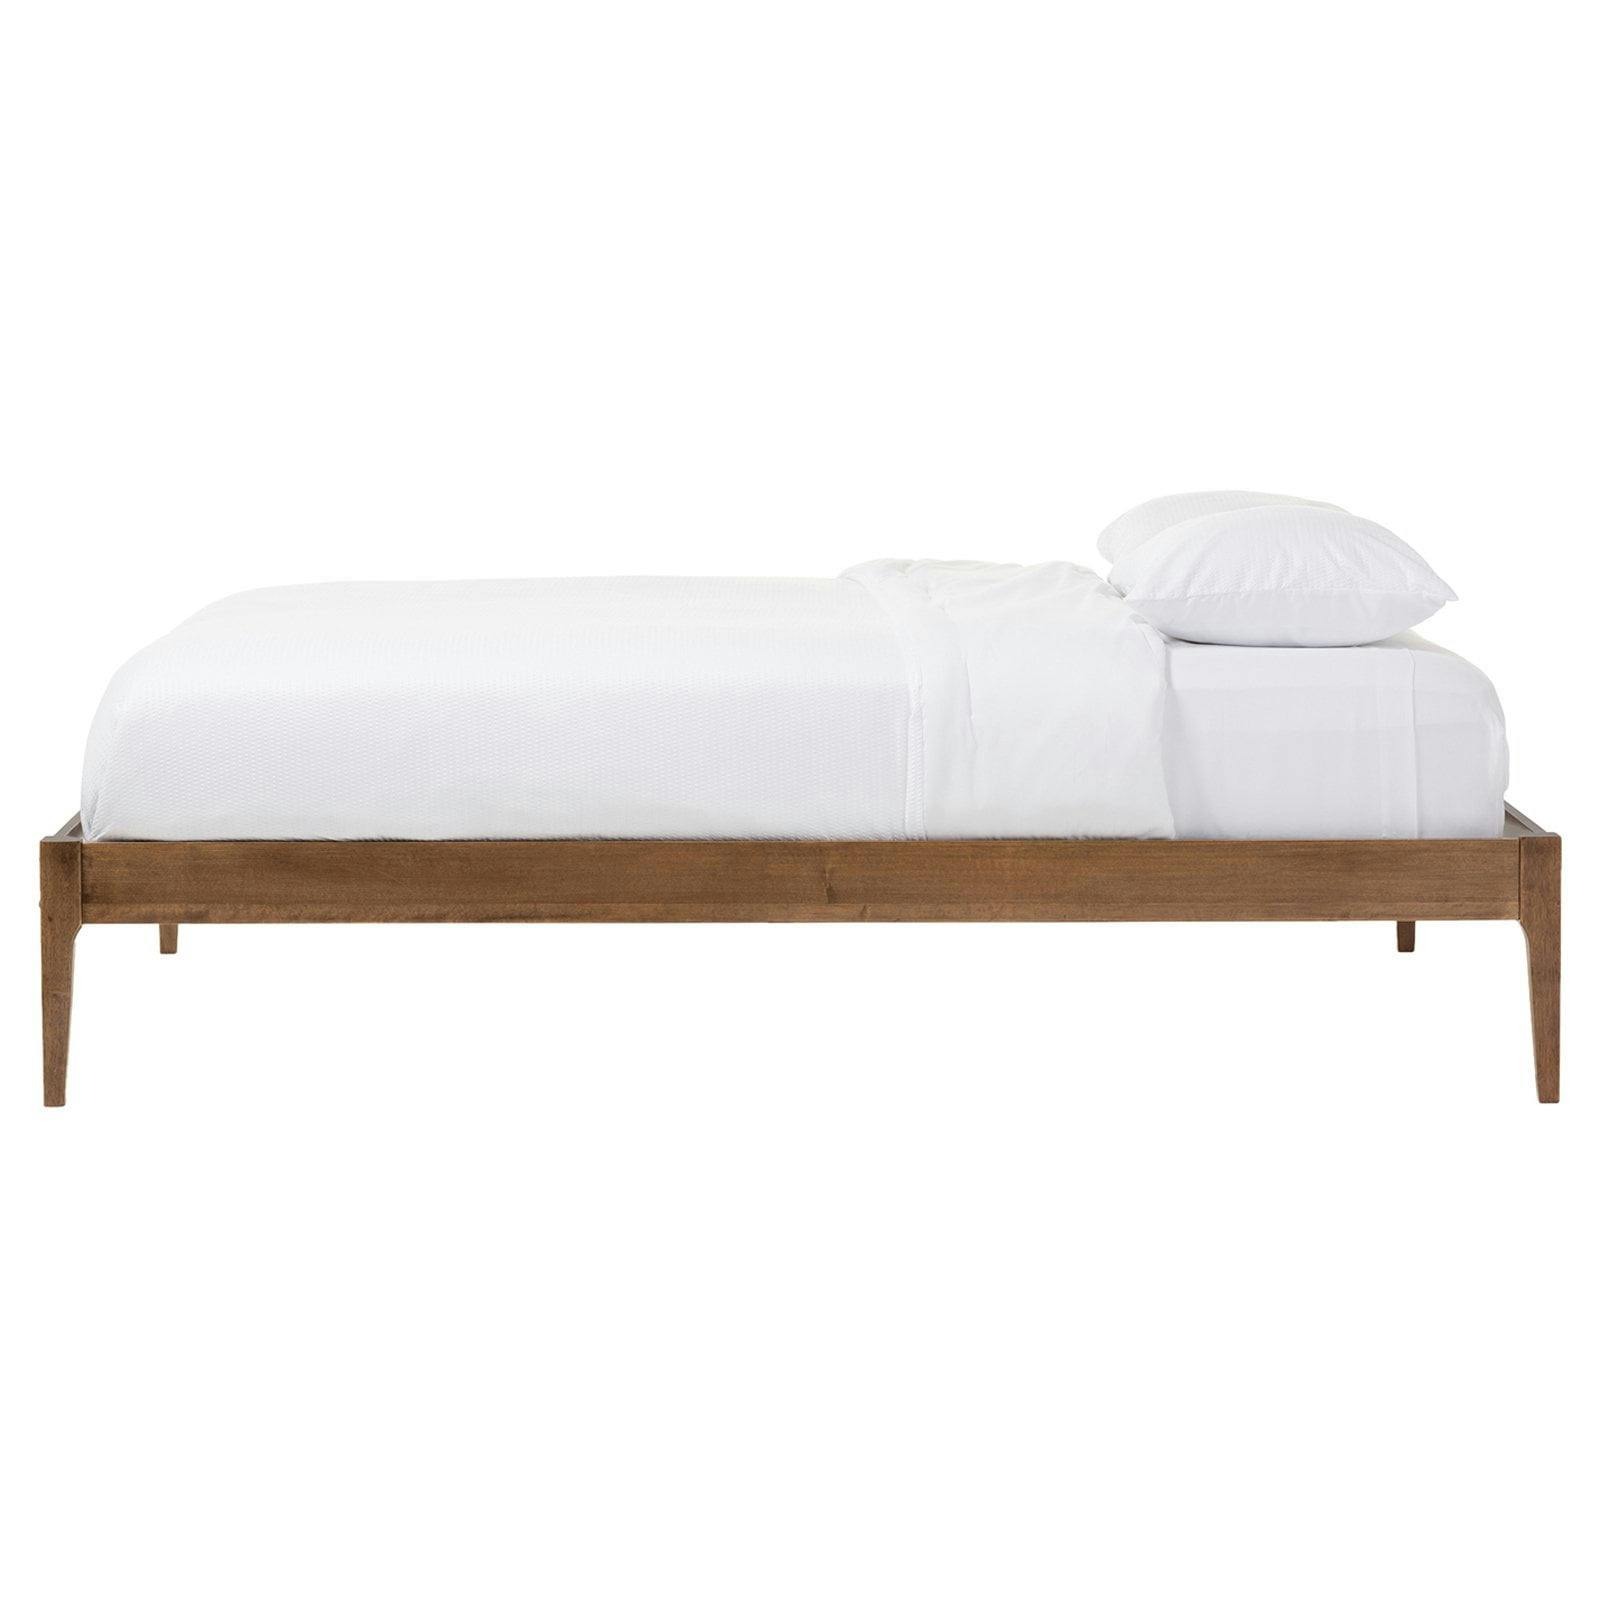 Mid-Century Modern Queen Bed Frame in Walnut Finish with Headboard